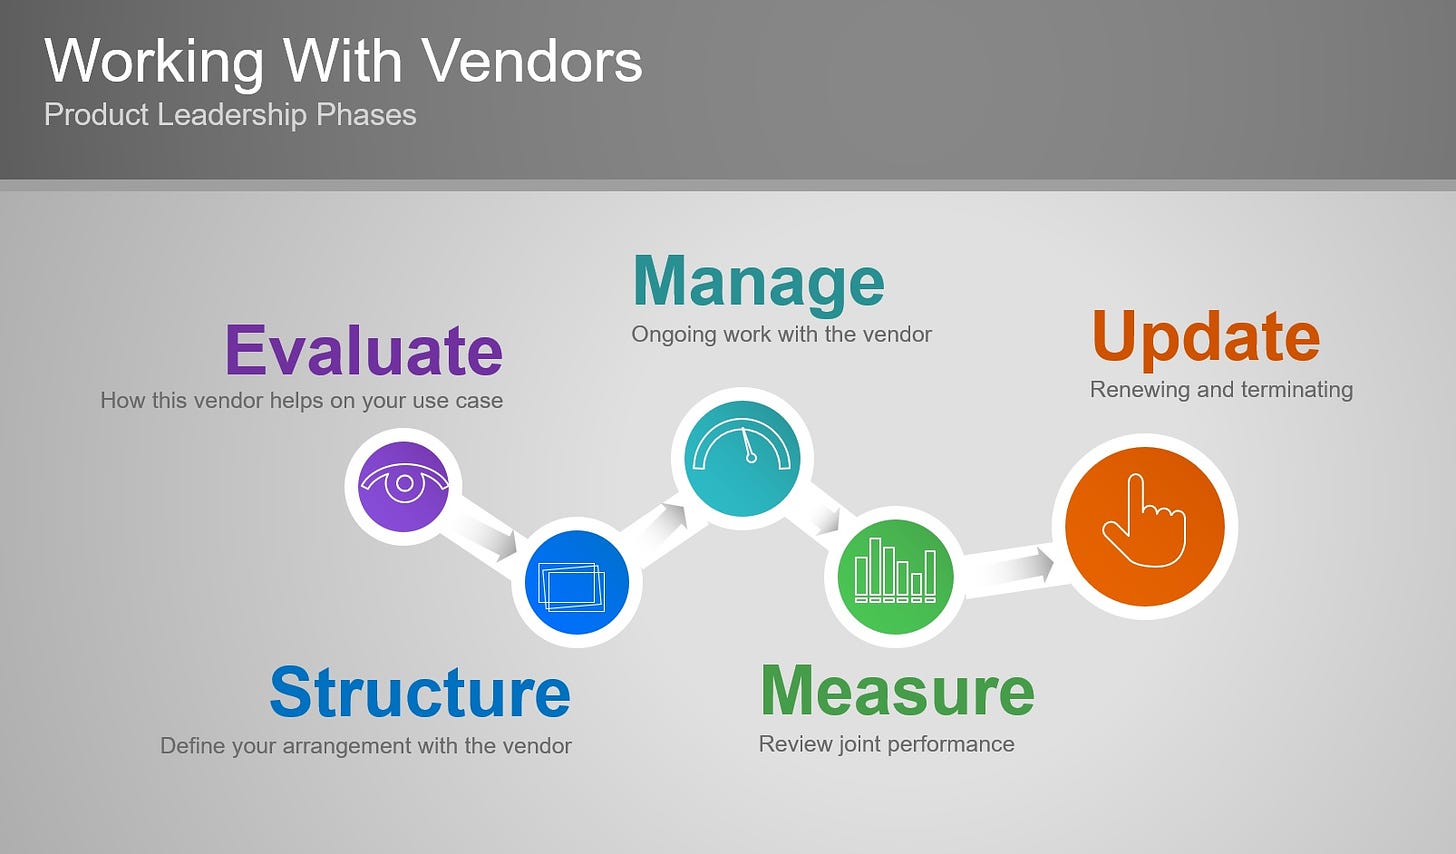 vendor management phases evaluate, structure, manage, measure and update